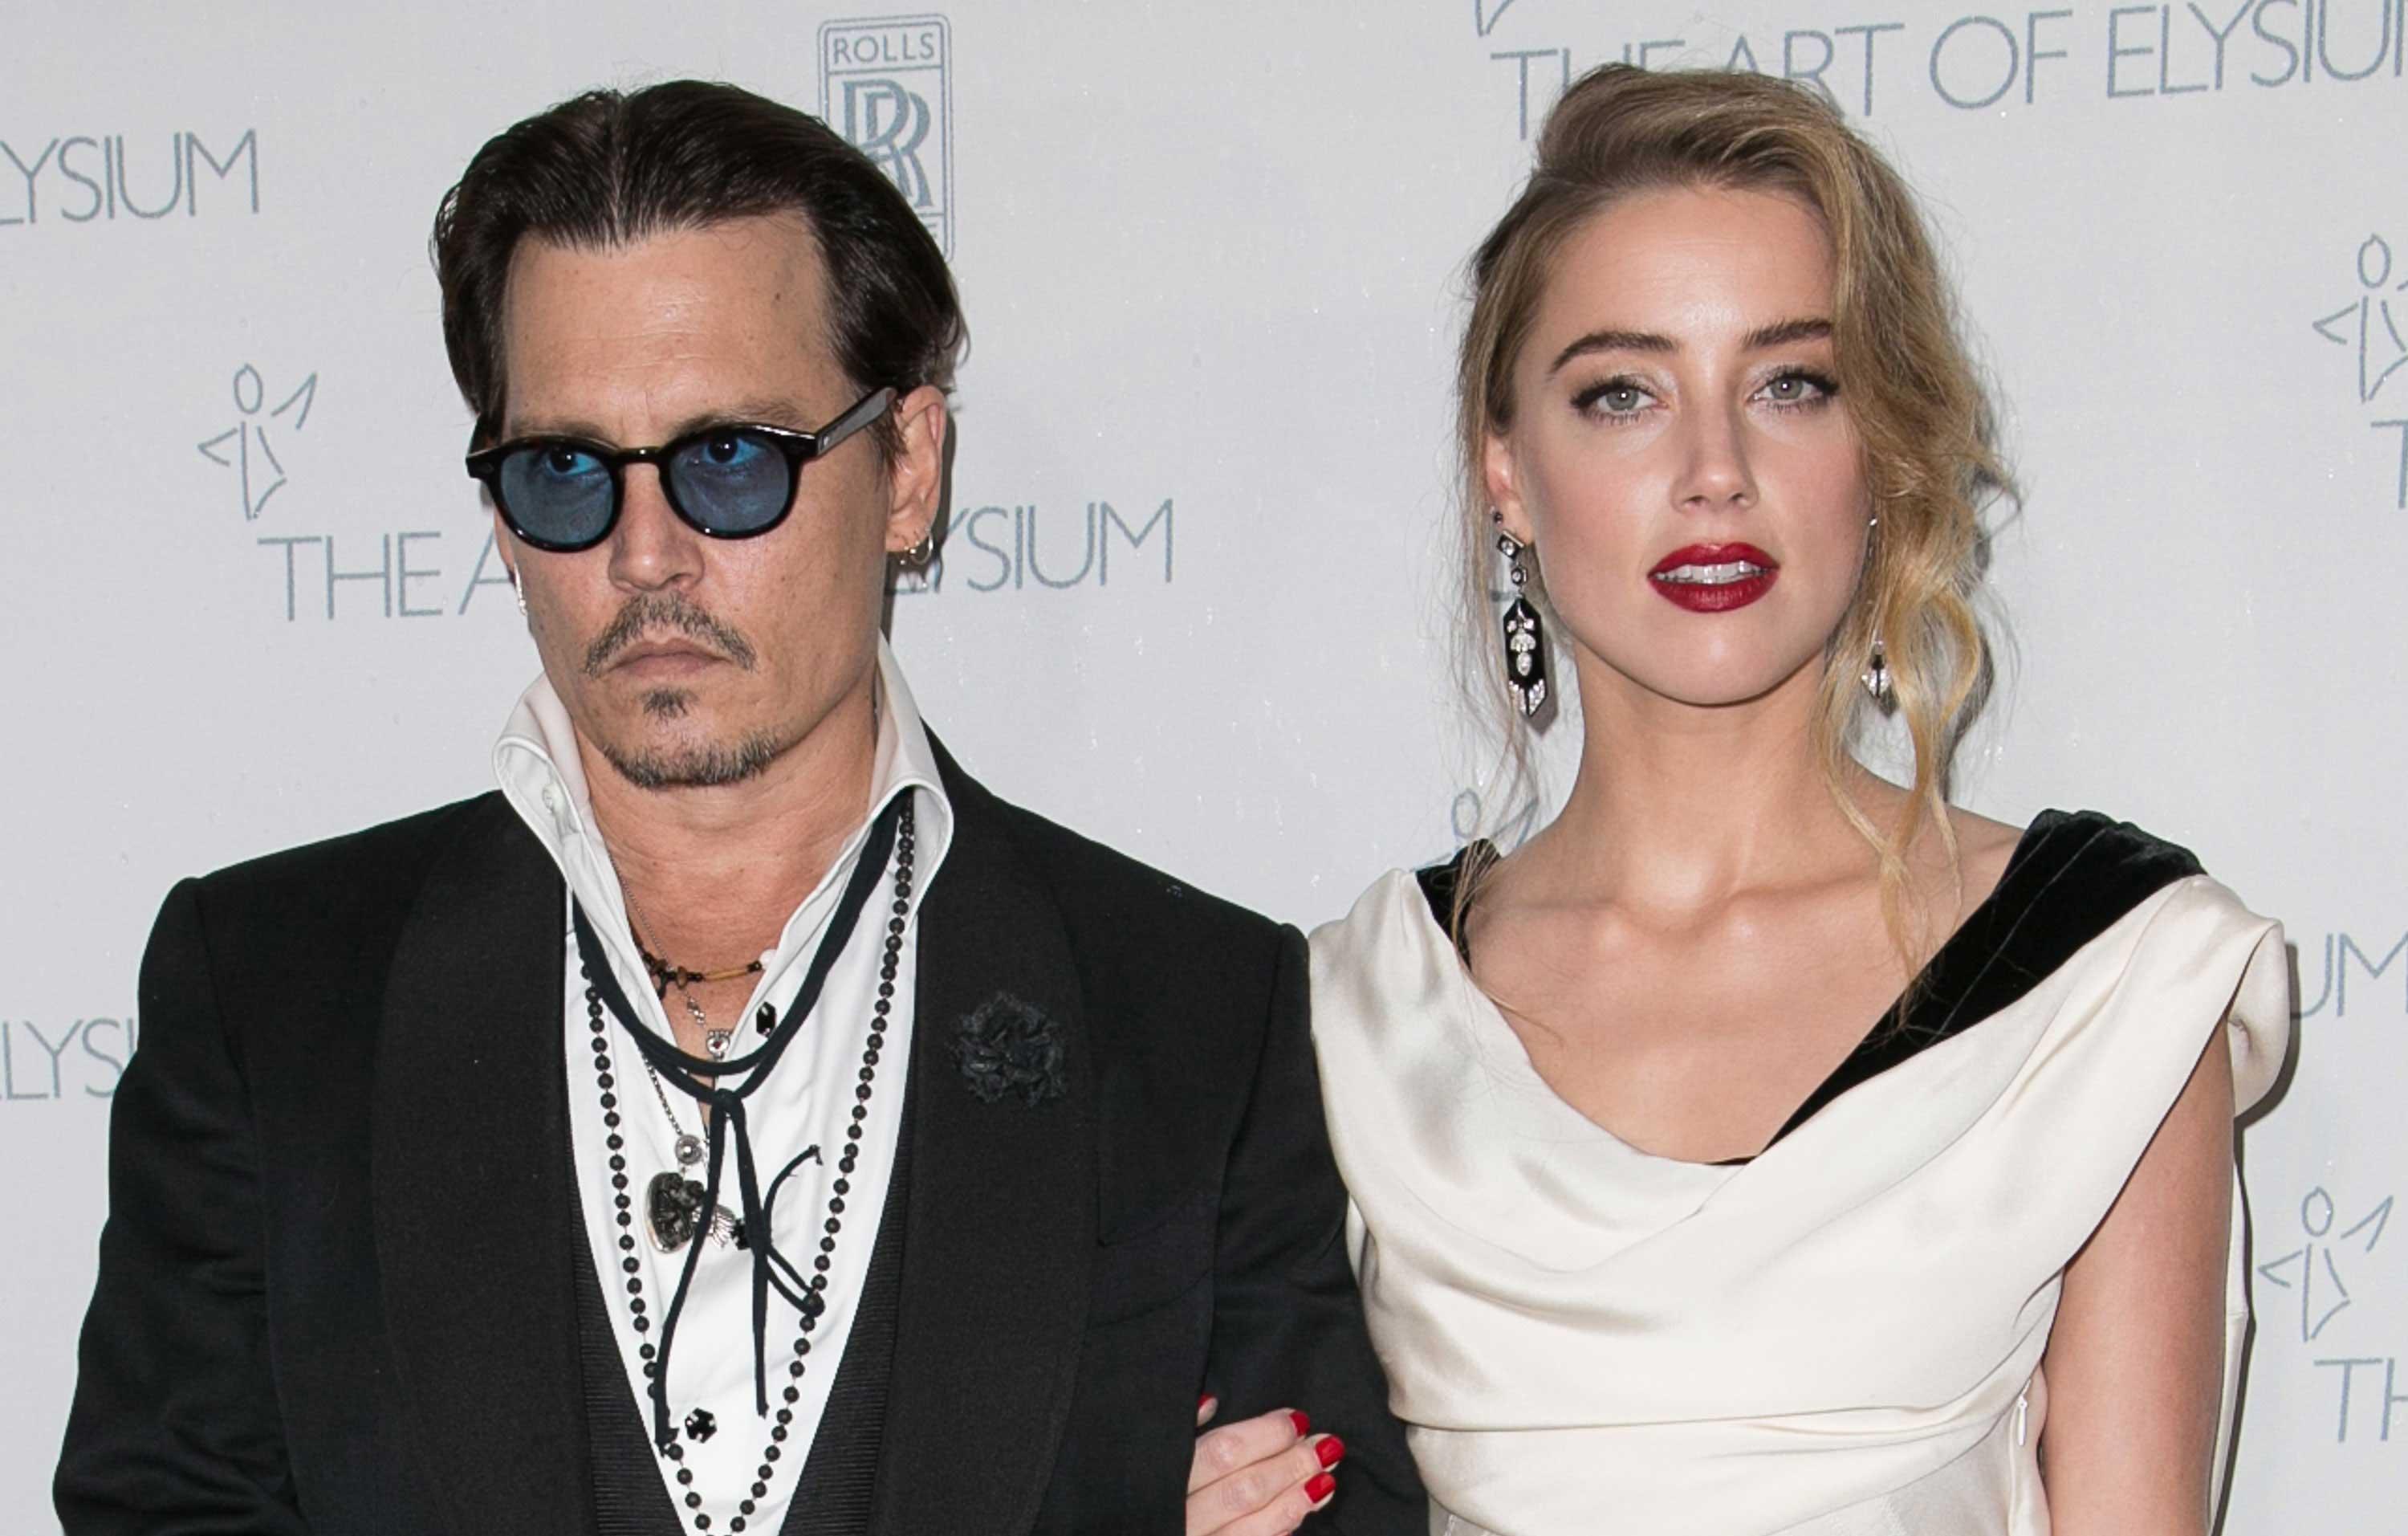 amber heard relaxes on vacation with pal who was banned from johnny depp trial